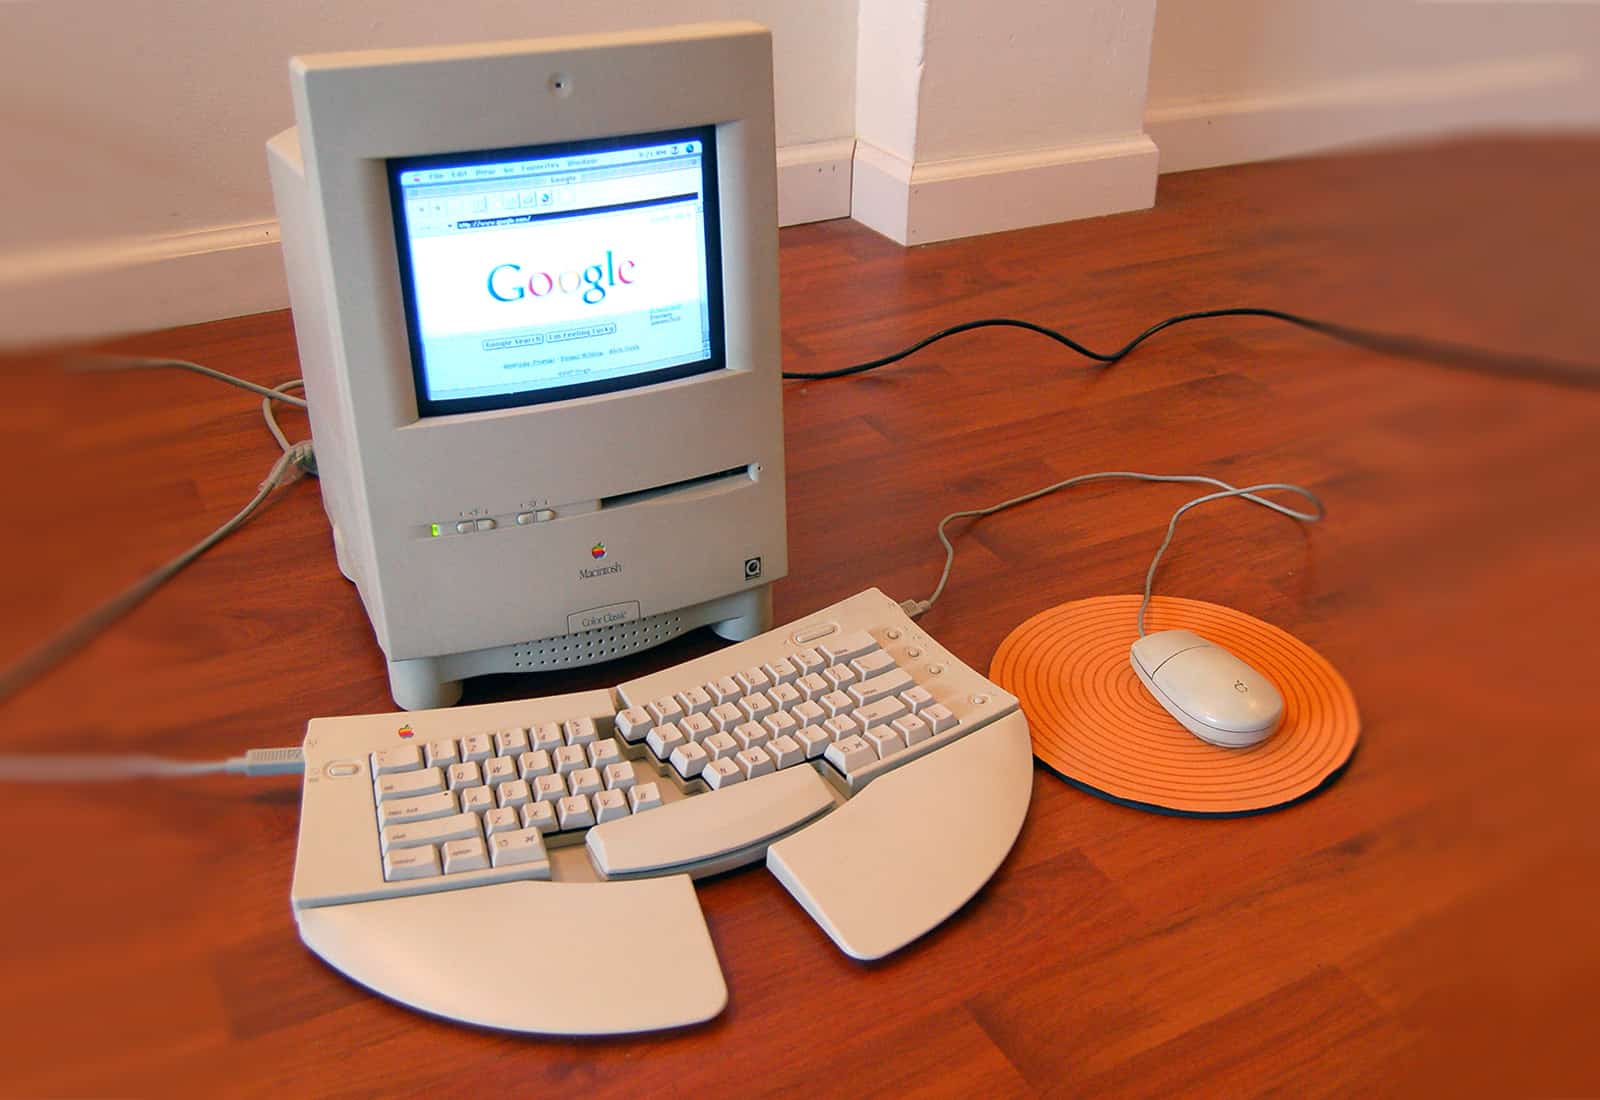 Today in Apple history: Macintosh Color Classic ditches monochrome